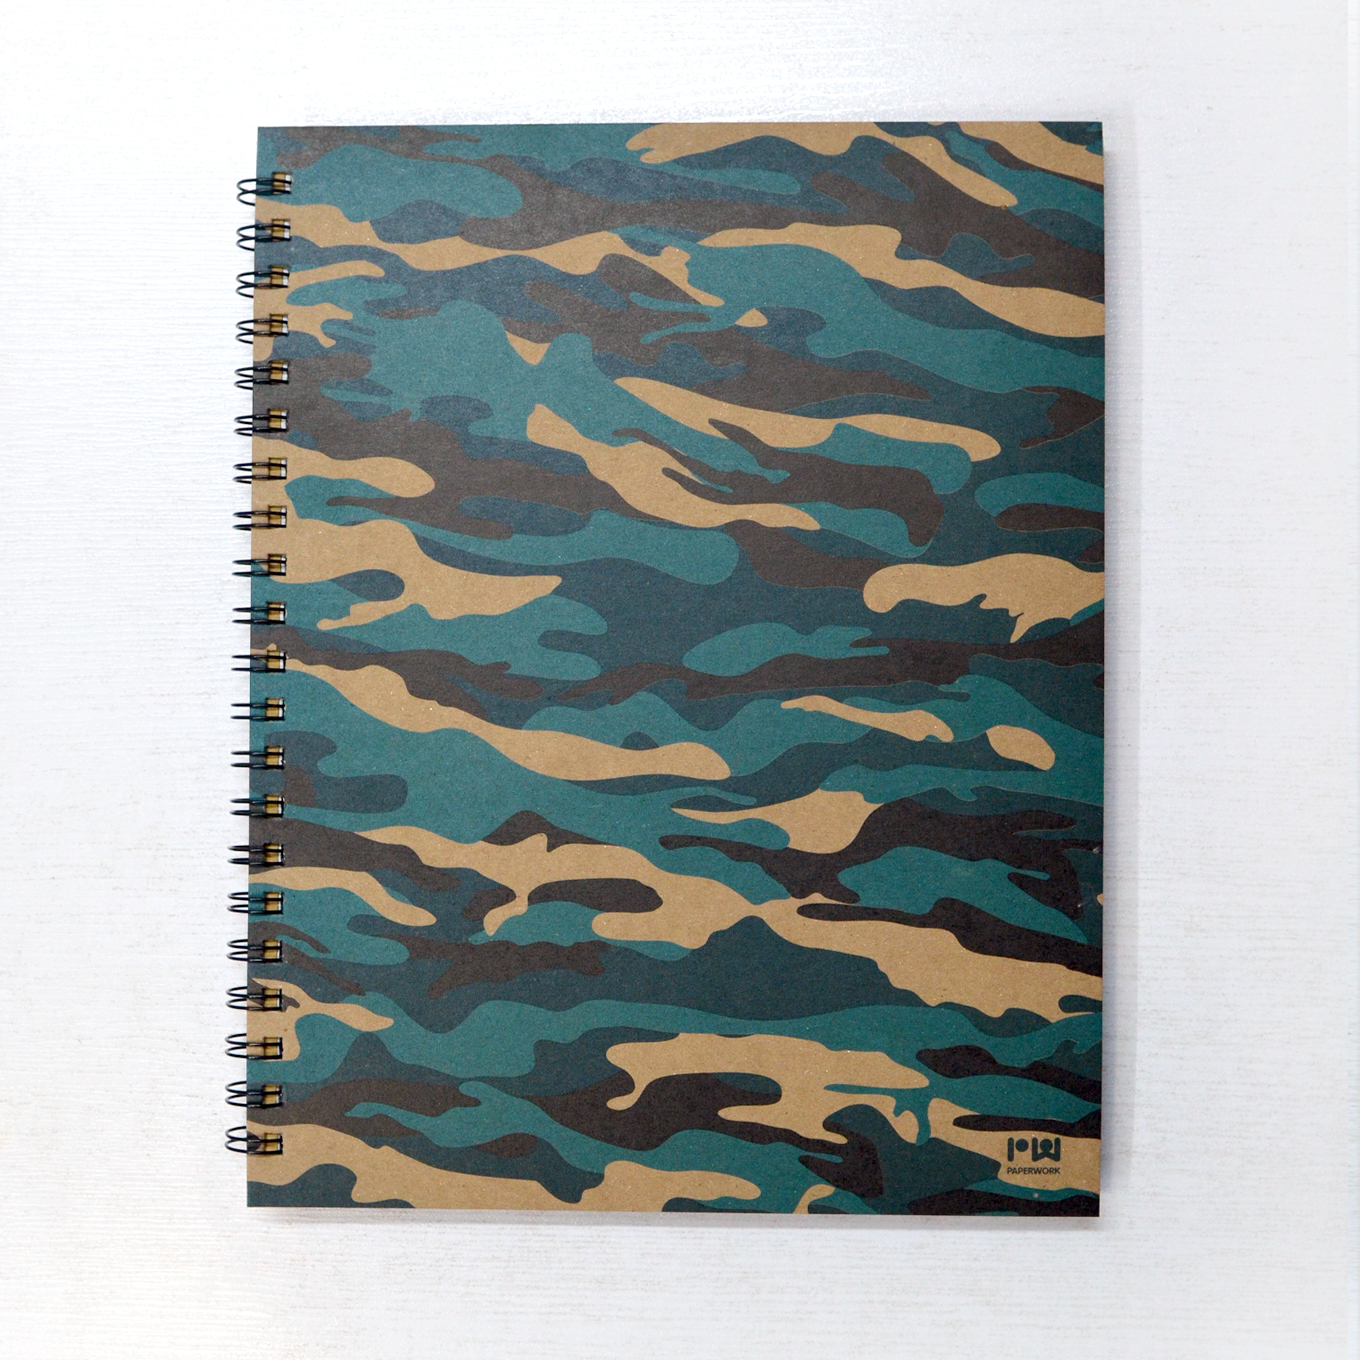 Spiral Notebook A4 - Navy Blue Camouflage - By Paperwork